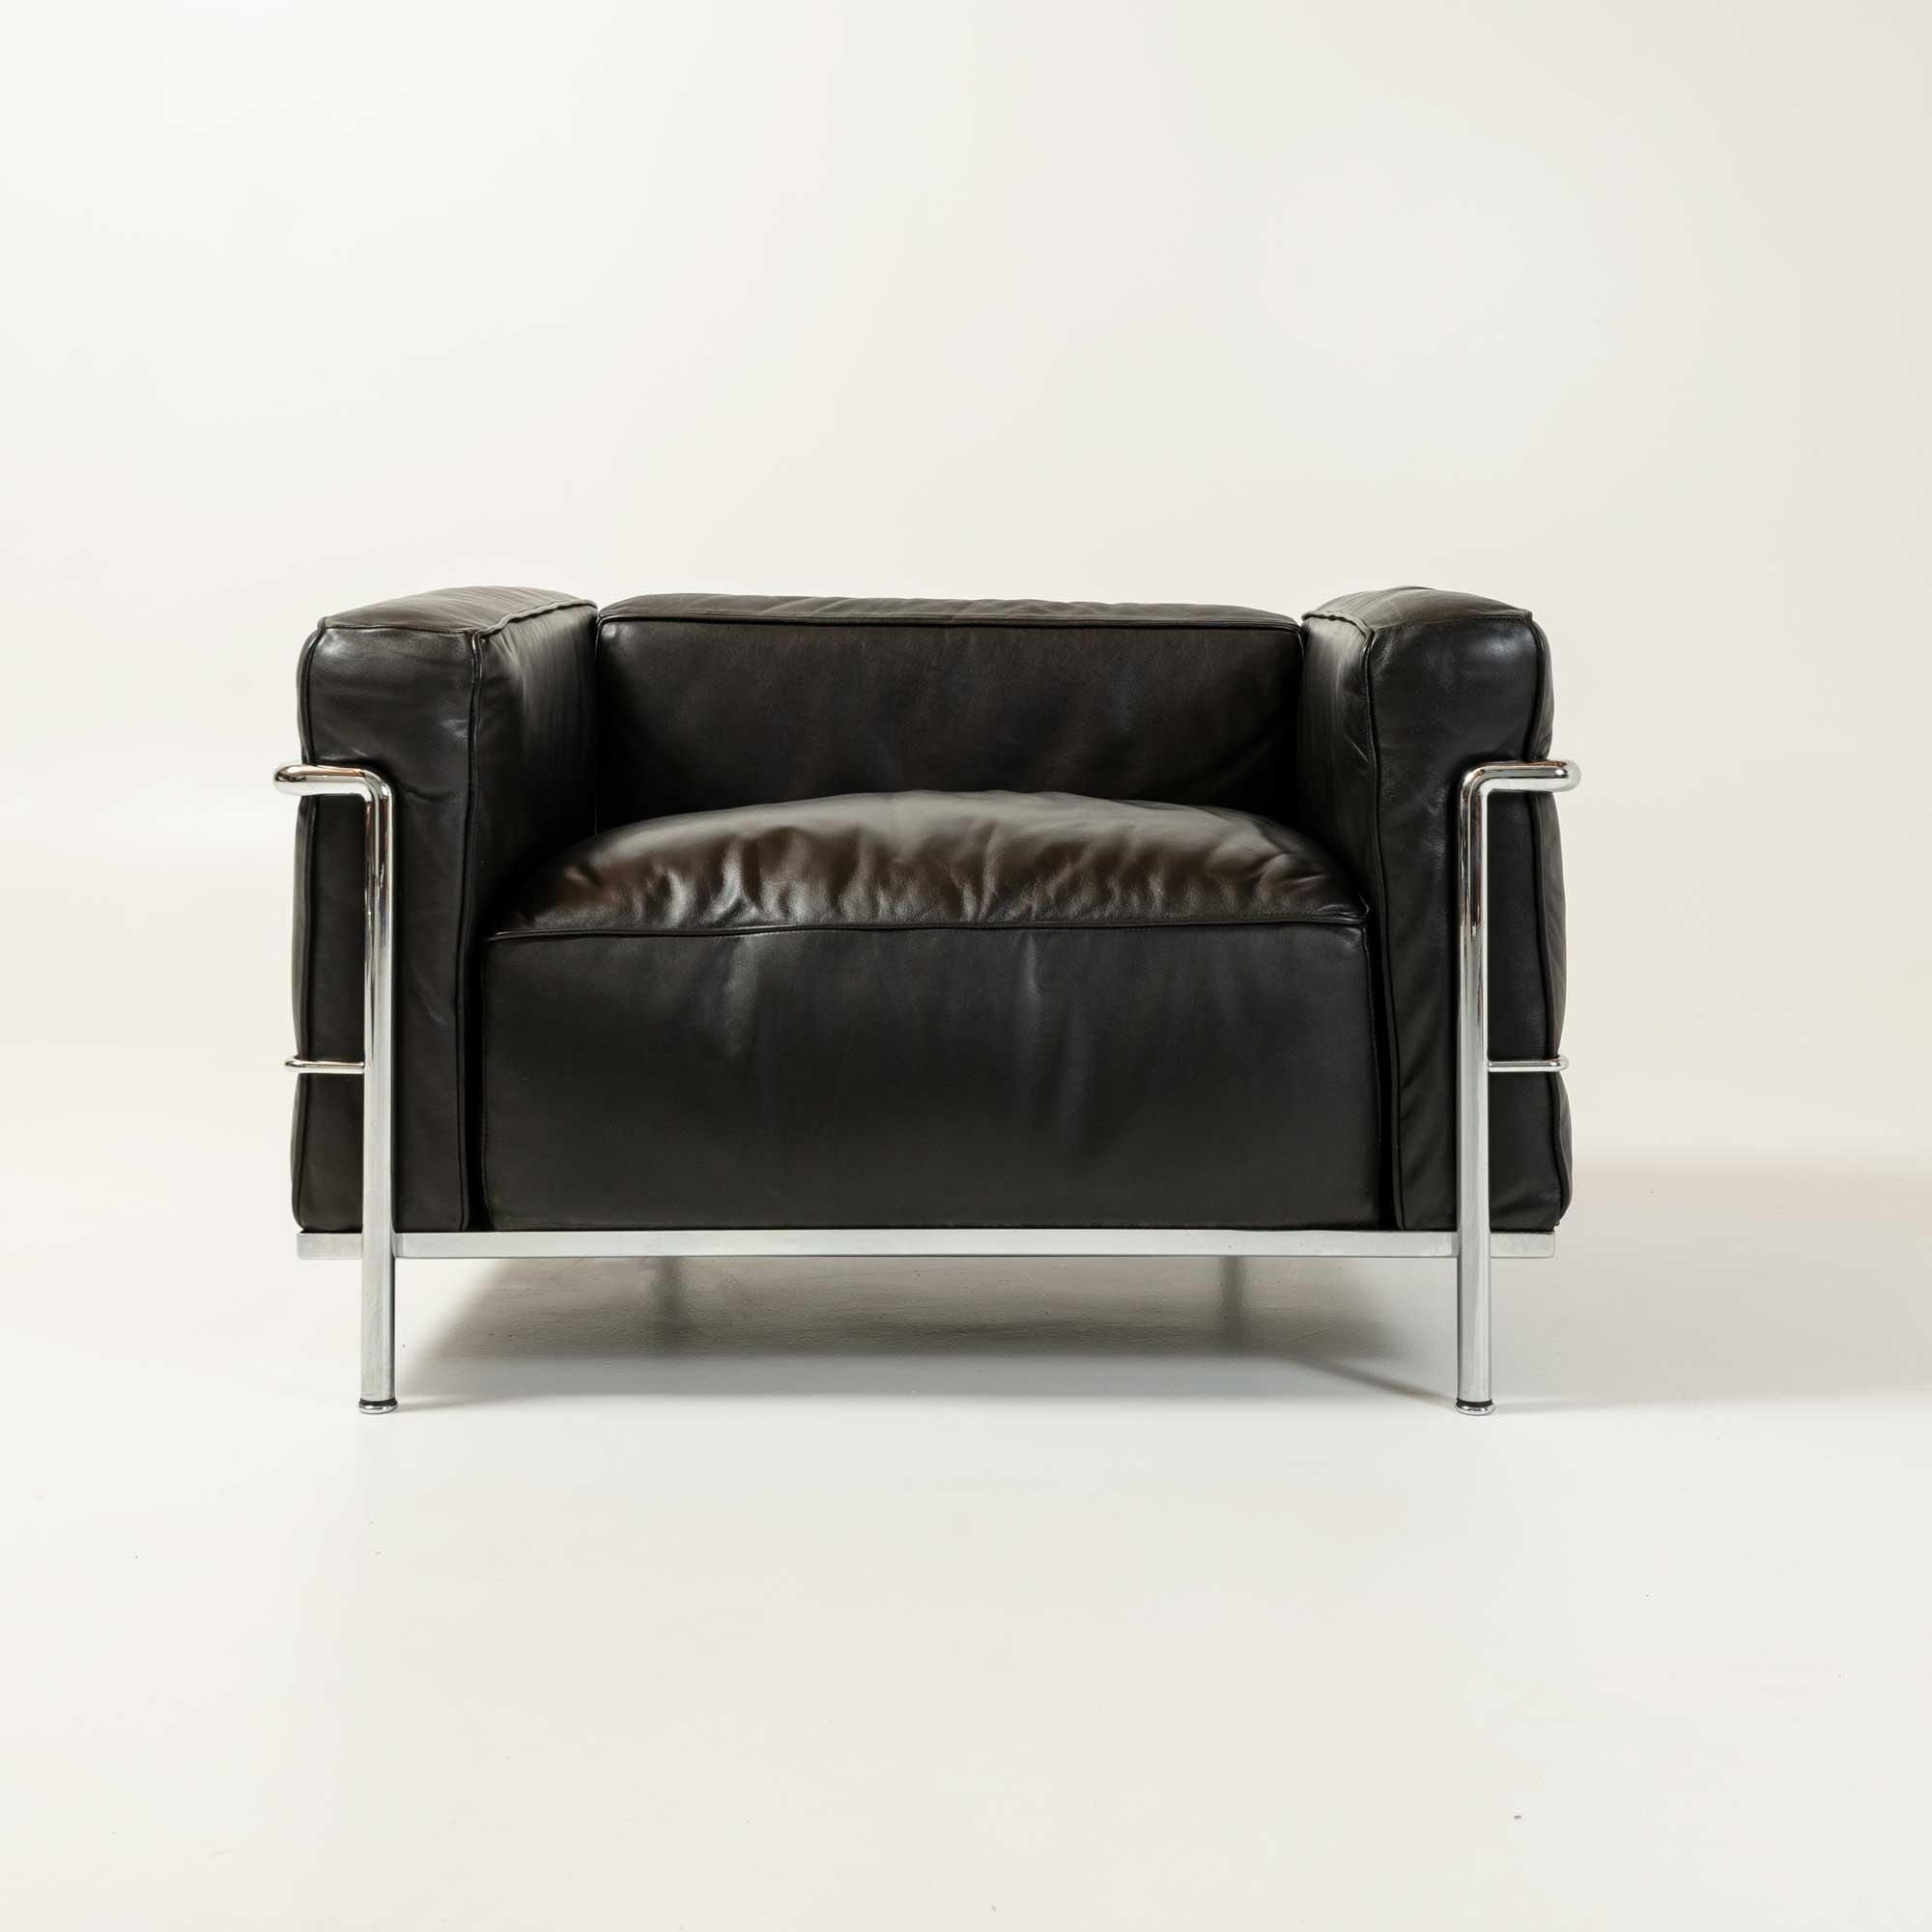 Iconic Bauhaus design by the Swiss-born architect Le Corbusier (Charles-Edouard Jeanneret) are the LC2 and LC3 armchairs. 
This vintage Fauteuil Grand Confort, or LC3 Lounge Chair, features original restored black leather cushions and a chrome